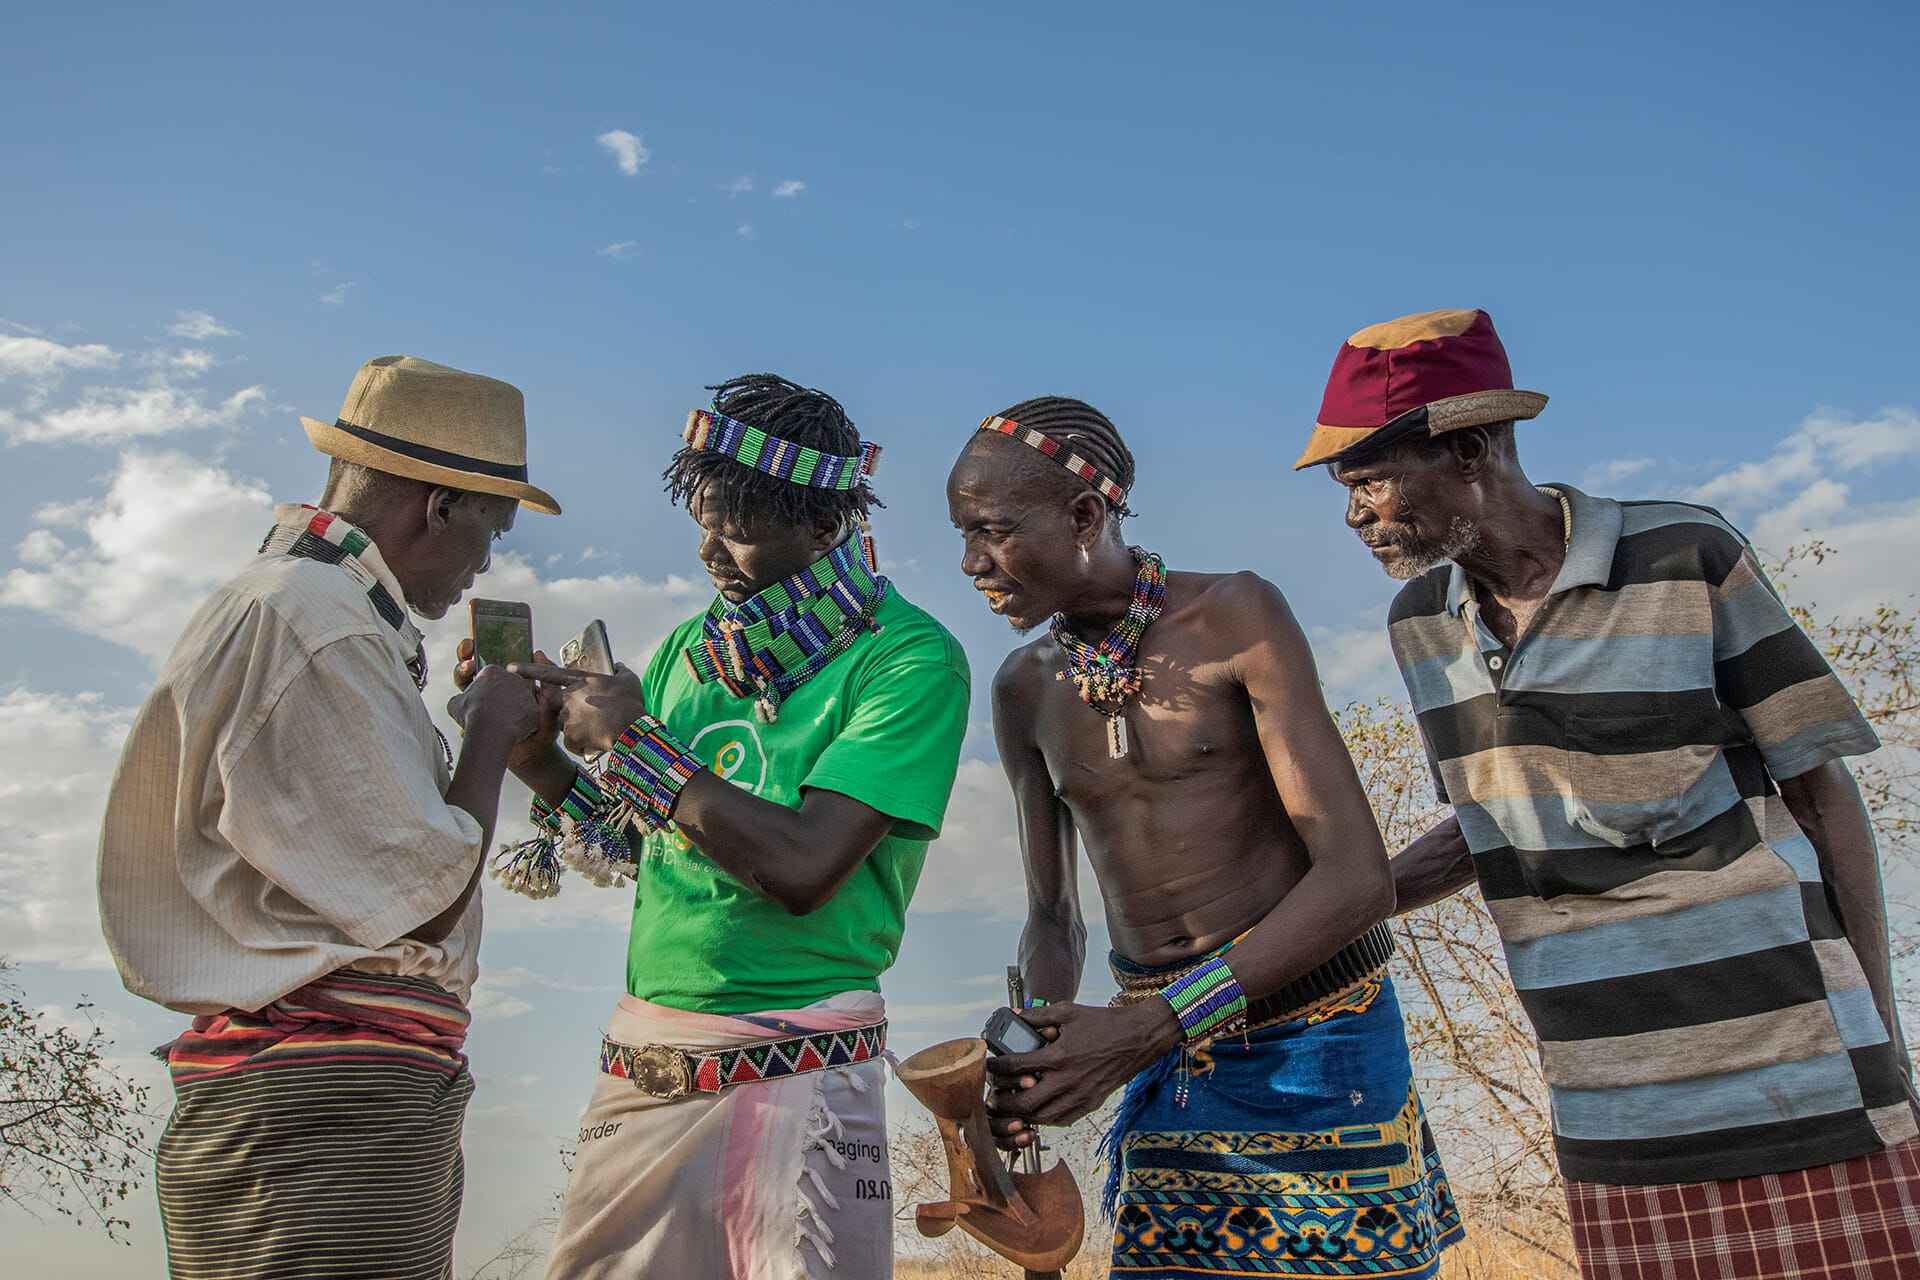 Kitabo Wele, 25, Afriscout promoter, discusses about the use of Afriscout application with a pastorialists Muda Gela, 66,  Andulsha Kefa, 45 and Kole Kilkila, 53 (right to left) in Hamer Woreda, South Omo zone, SNNPR, Ethiopia.